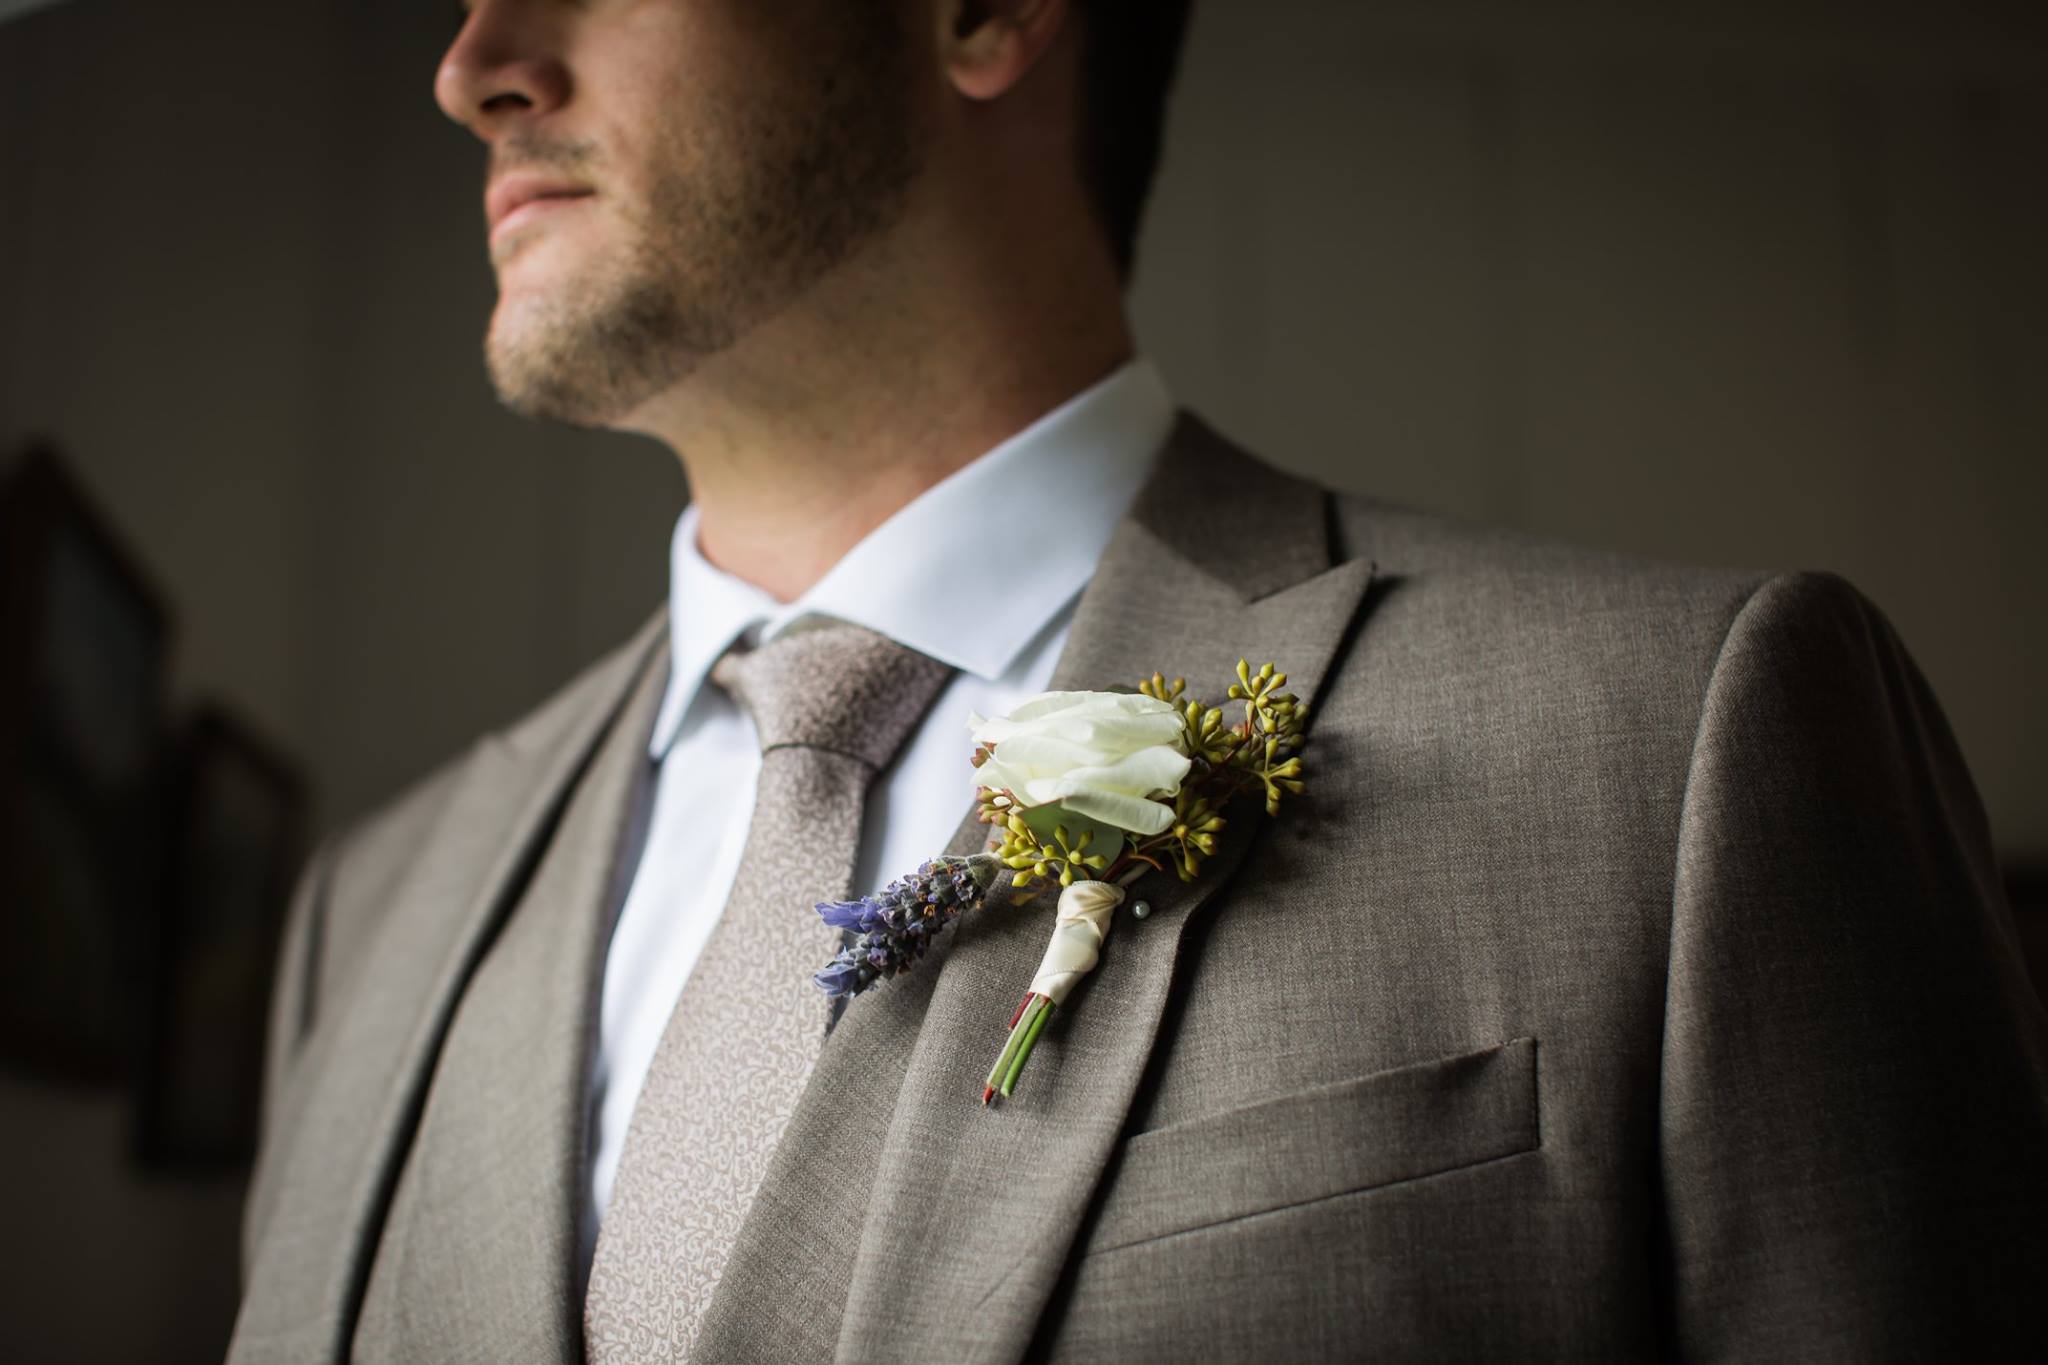  detail shot of groom’s suit and boutonniere 